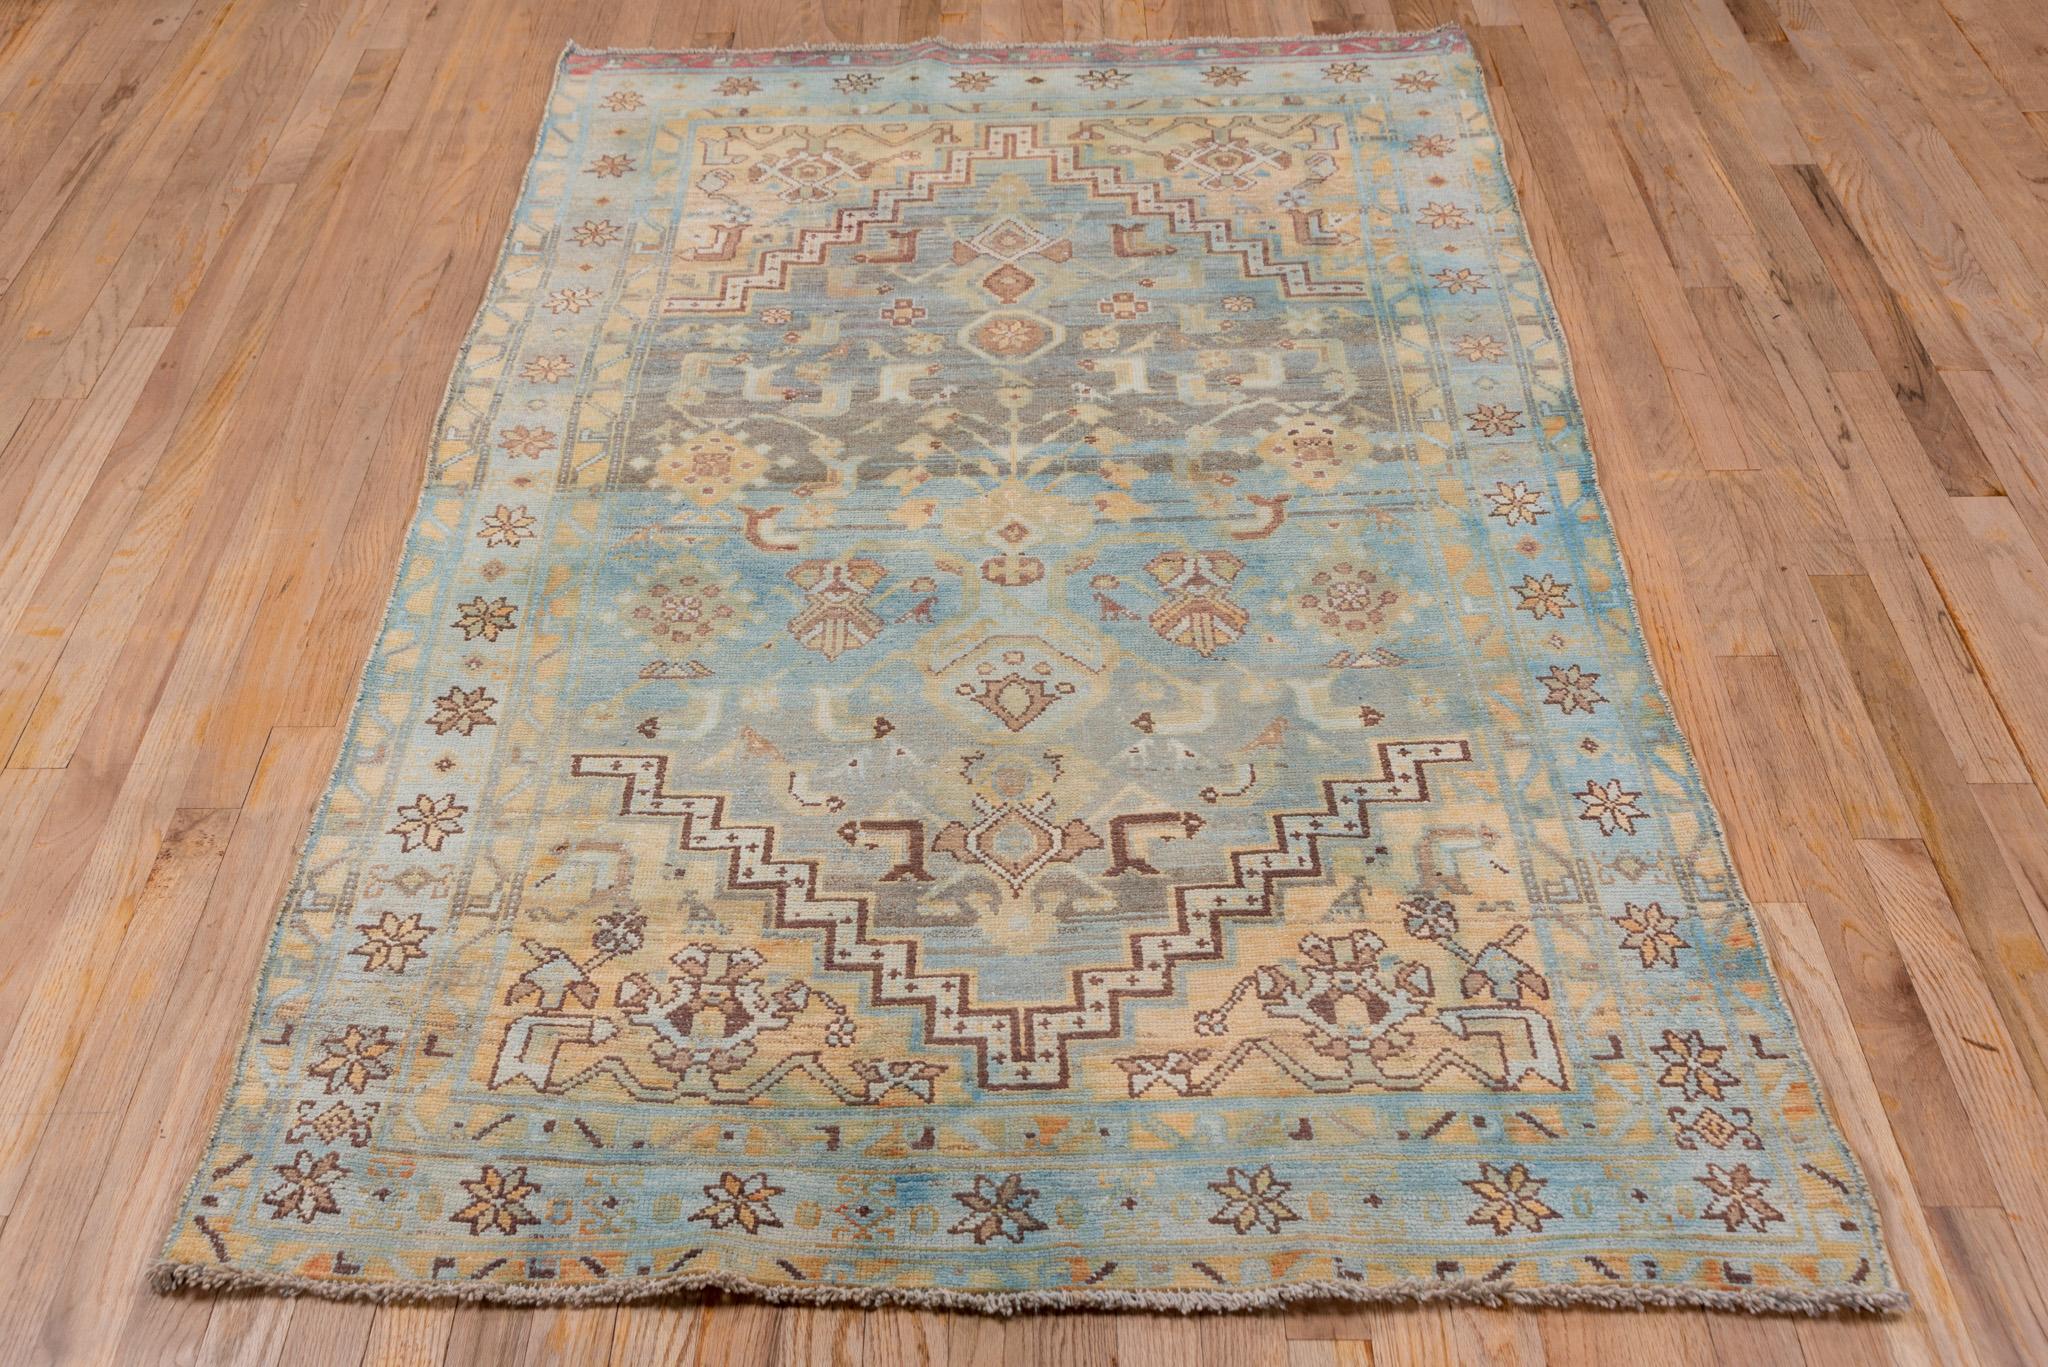 A Malayer Rug circa 1940. Handknotted with 100% wool yarn.